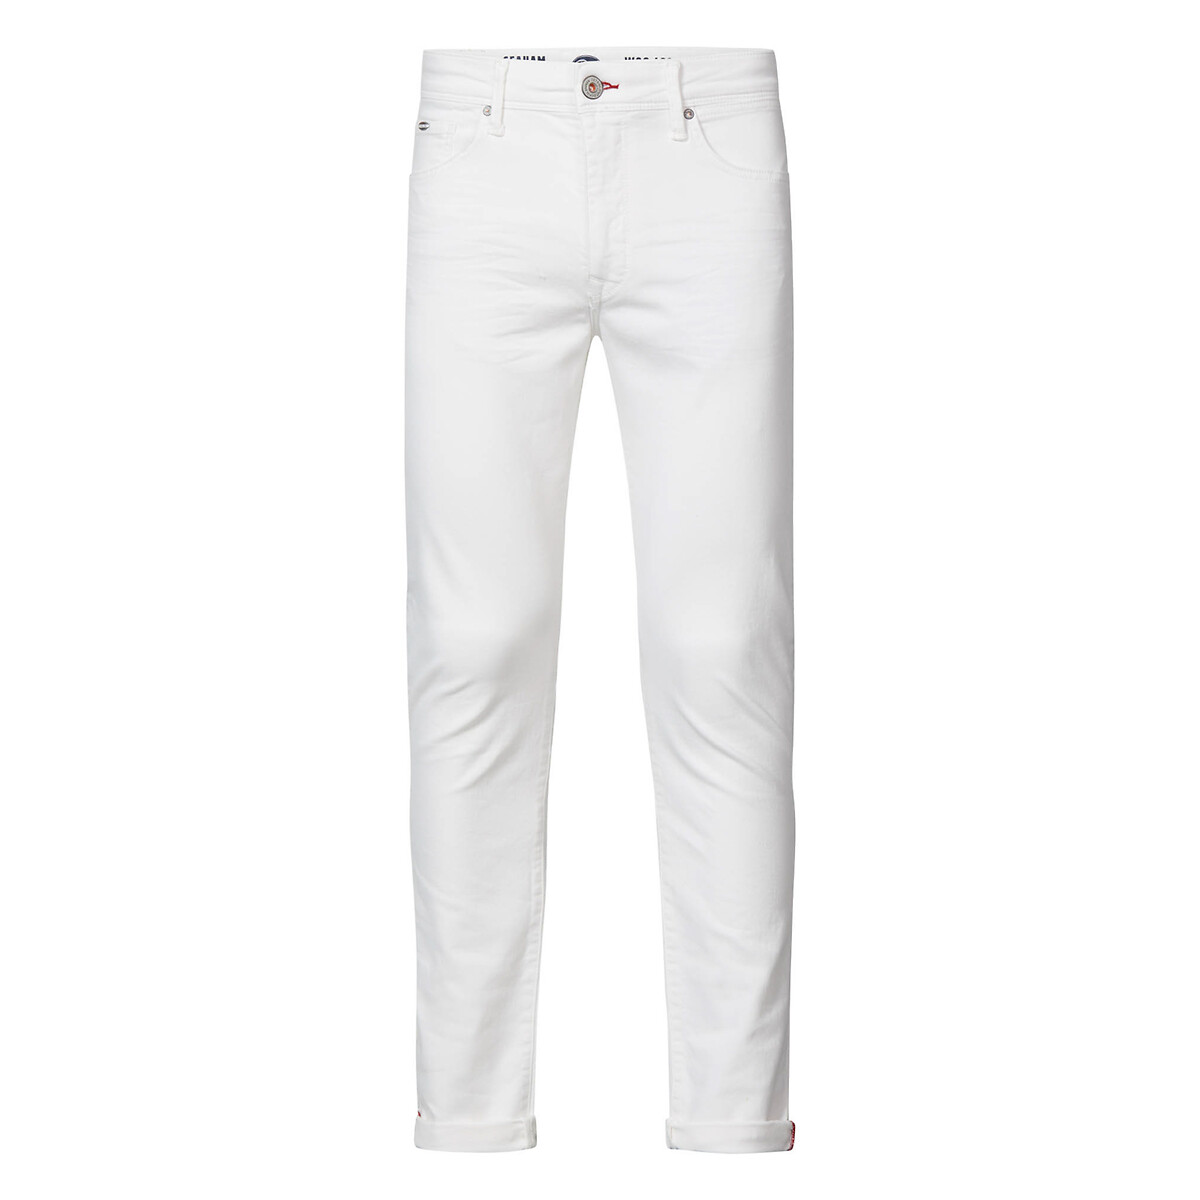 Dn007 slim stretch jeans in mid rise , white, Petrol Industries | La